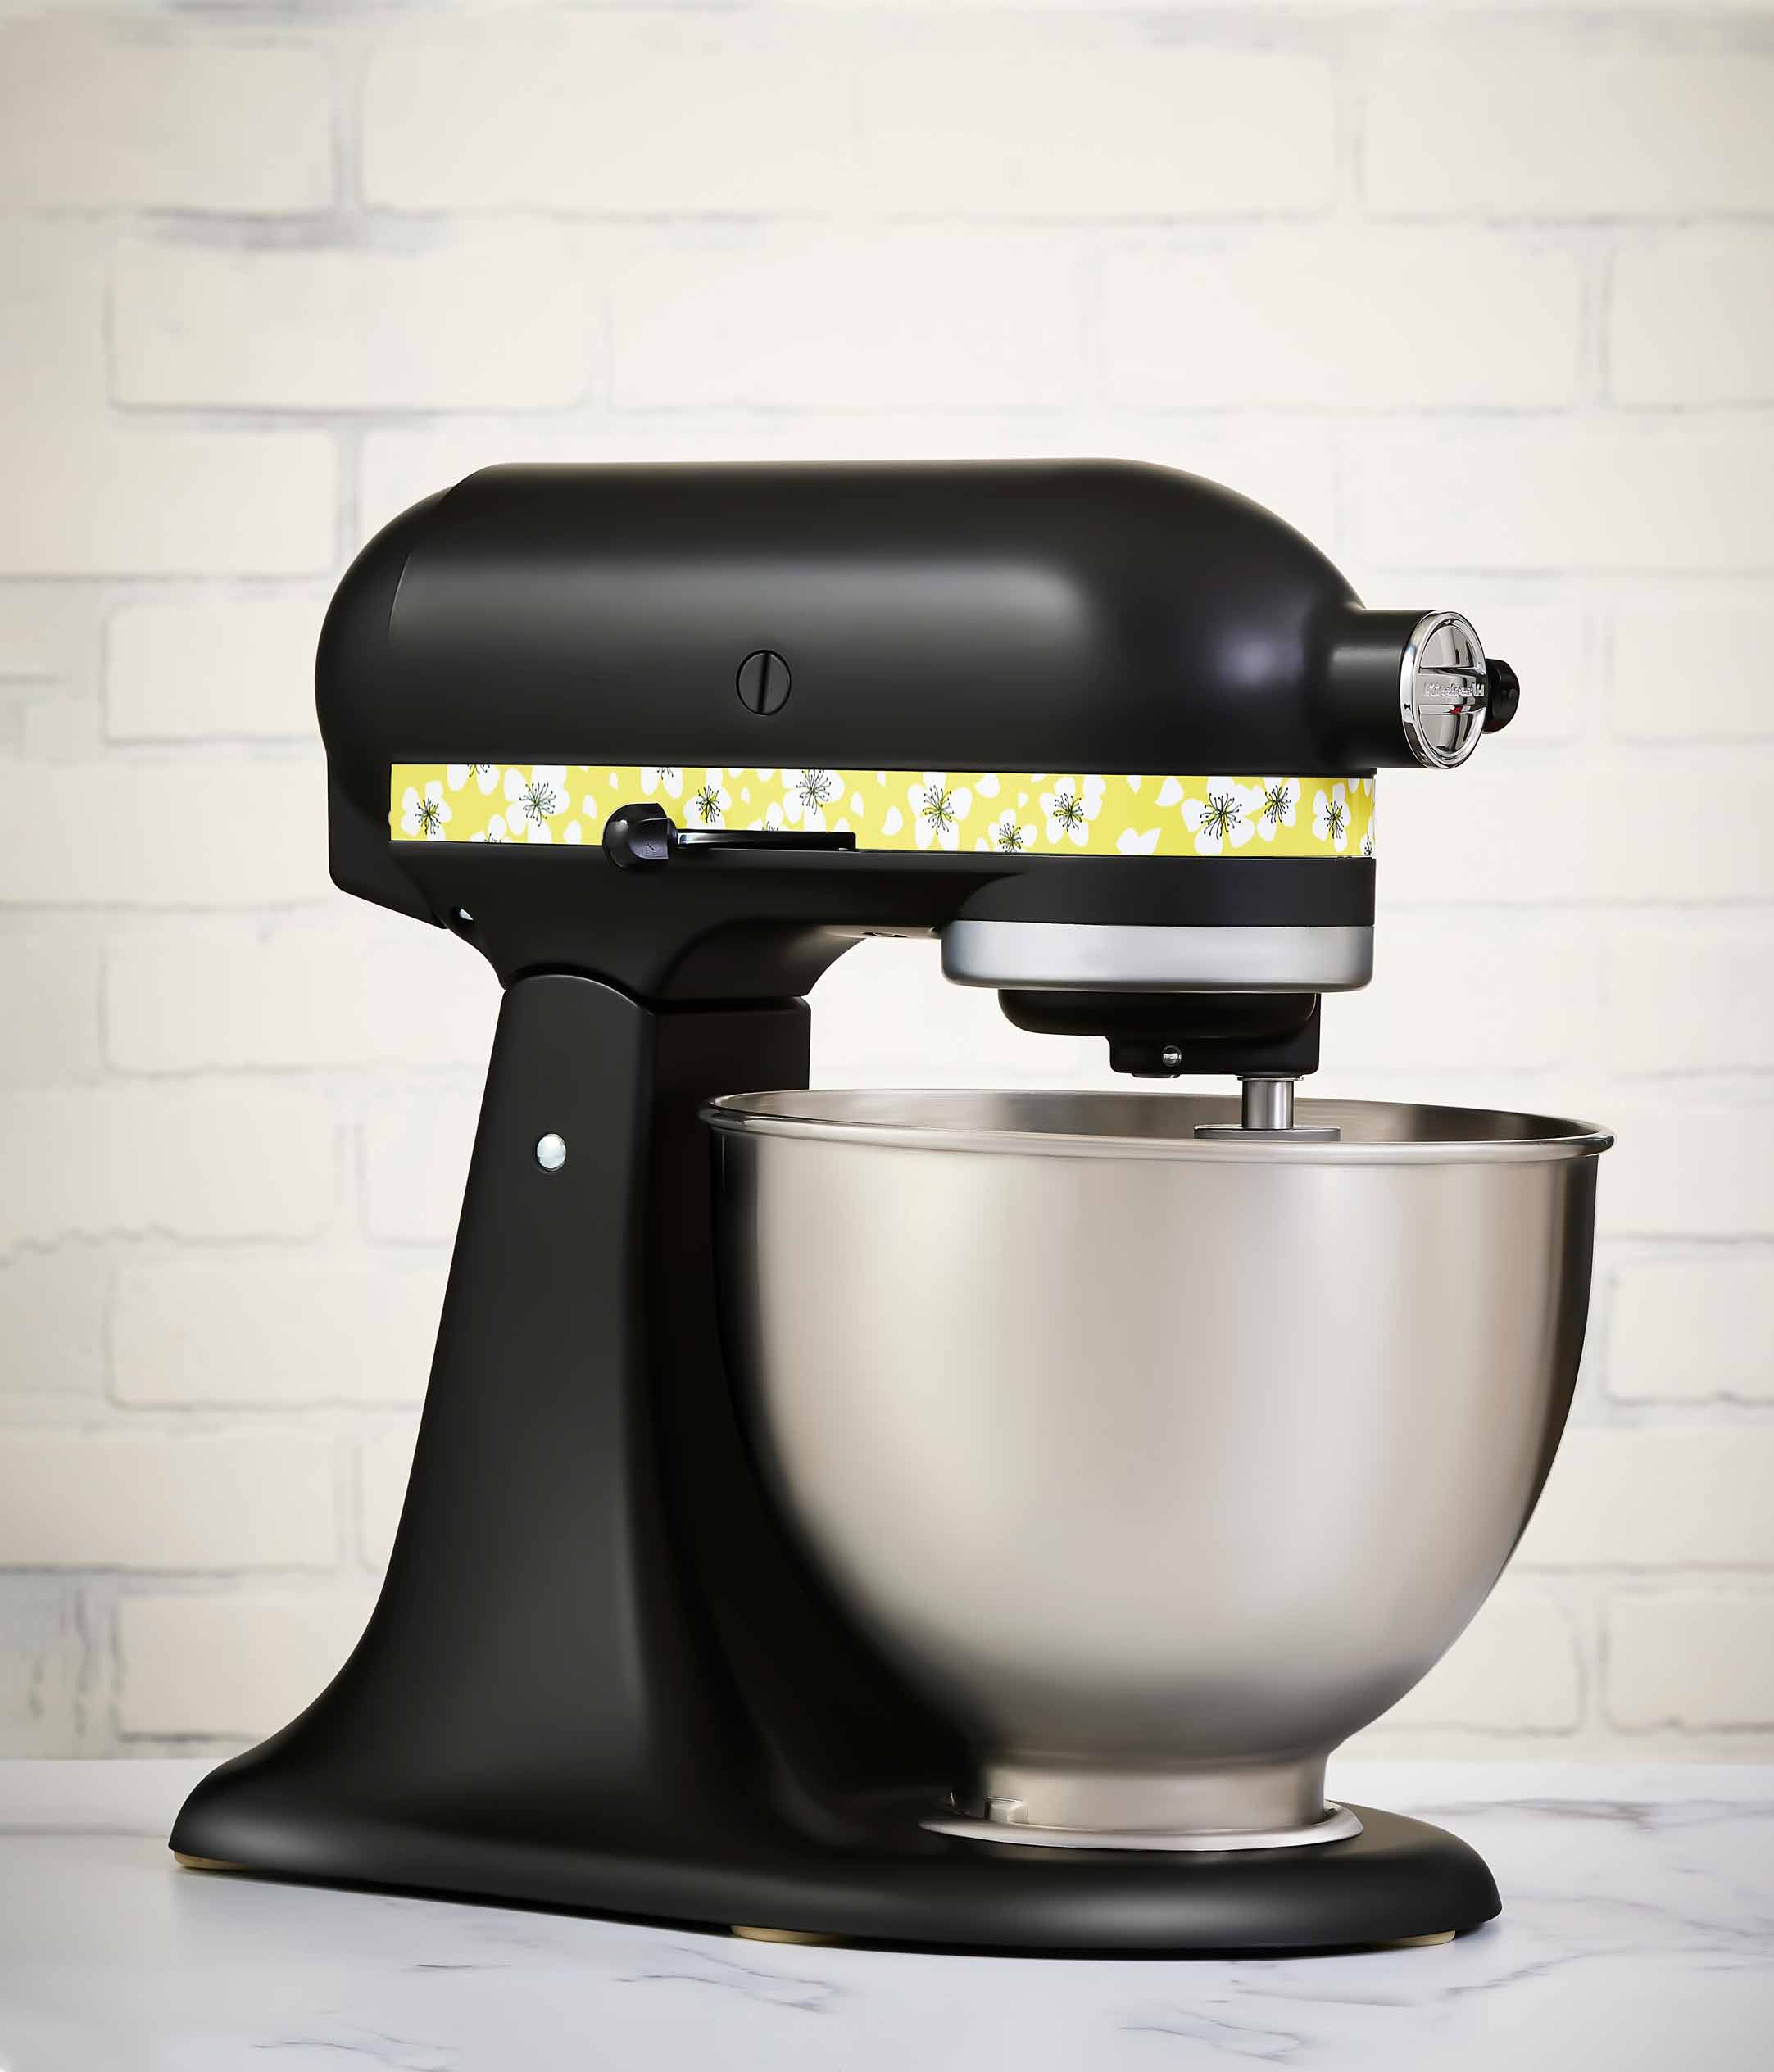 Rent to Own Kitchen Aid KitchenAid 5.5 Quart Bowl-Lift Stand Mixer - Ink  Blue at Aaron's today!